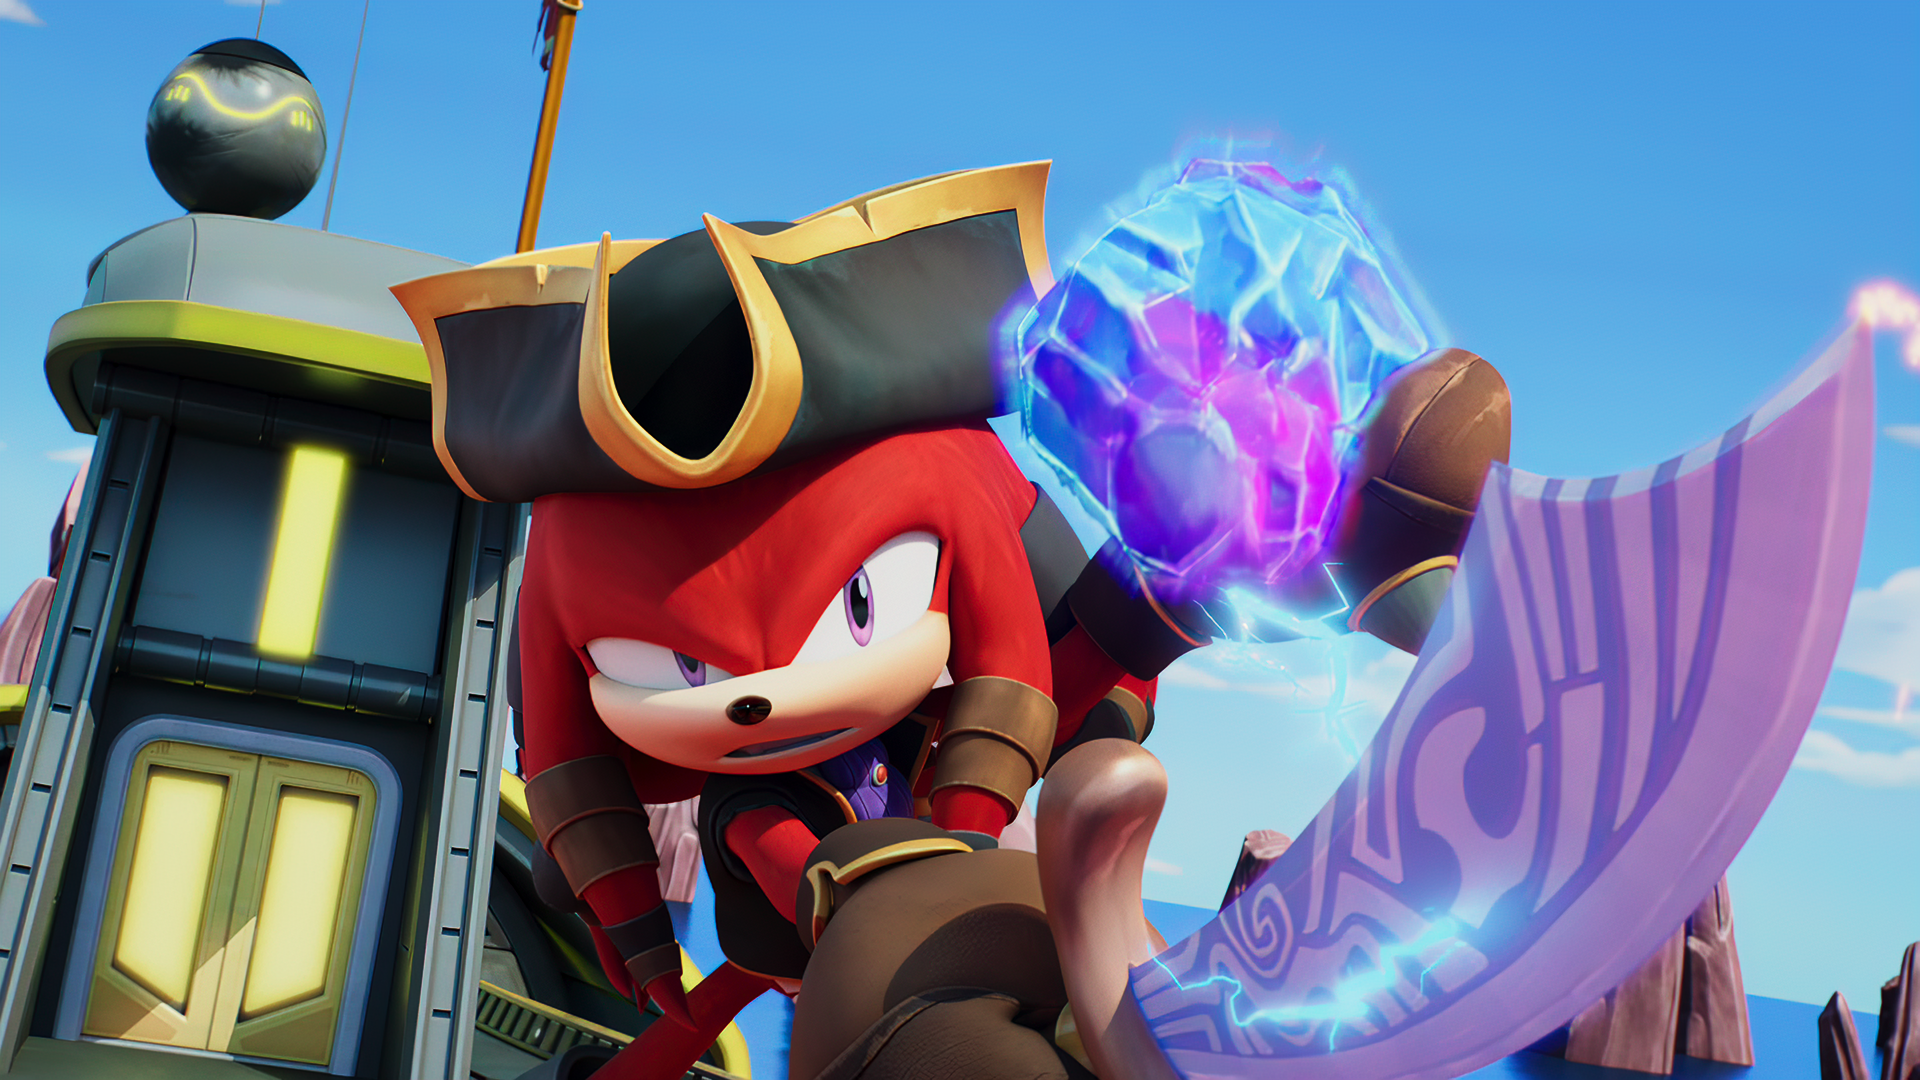 PREDICTIONS: In Sonic Prime, Pirate Knuckles' crewmates will be